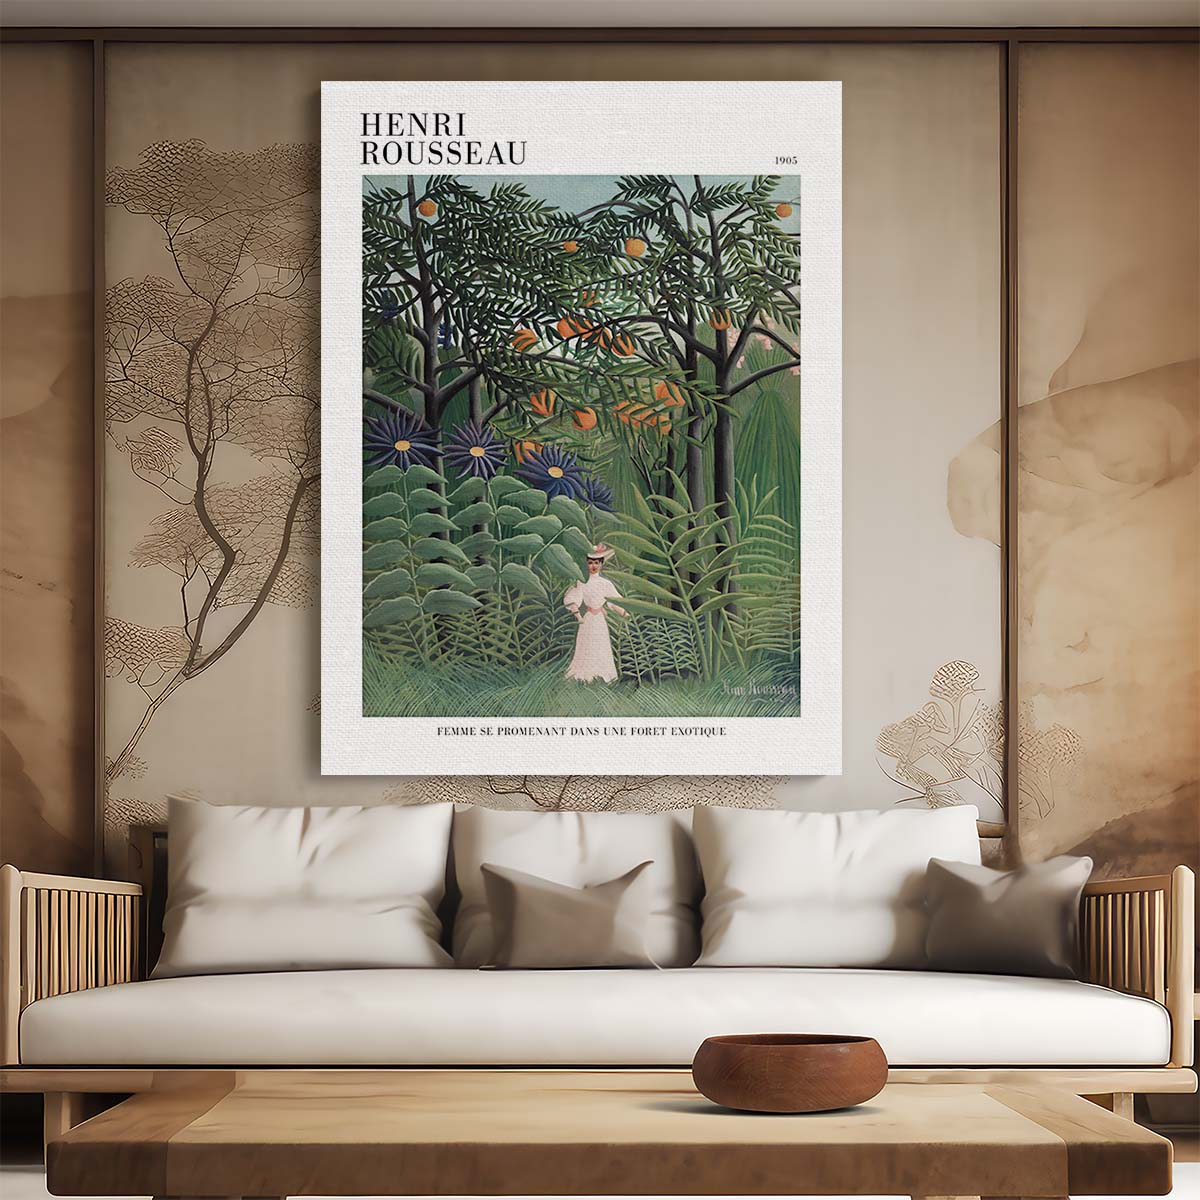 Rousseau's Acrylic Painting, Woman in Forest, Figurative Art Poster by Luxuriance Designs, made in USA